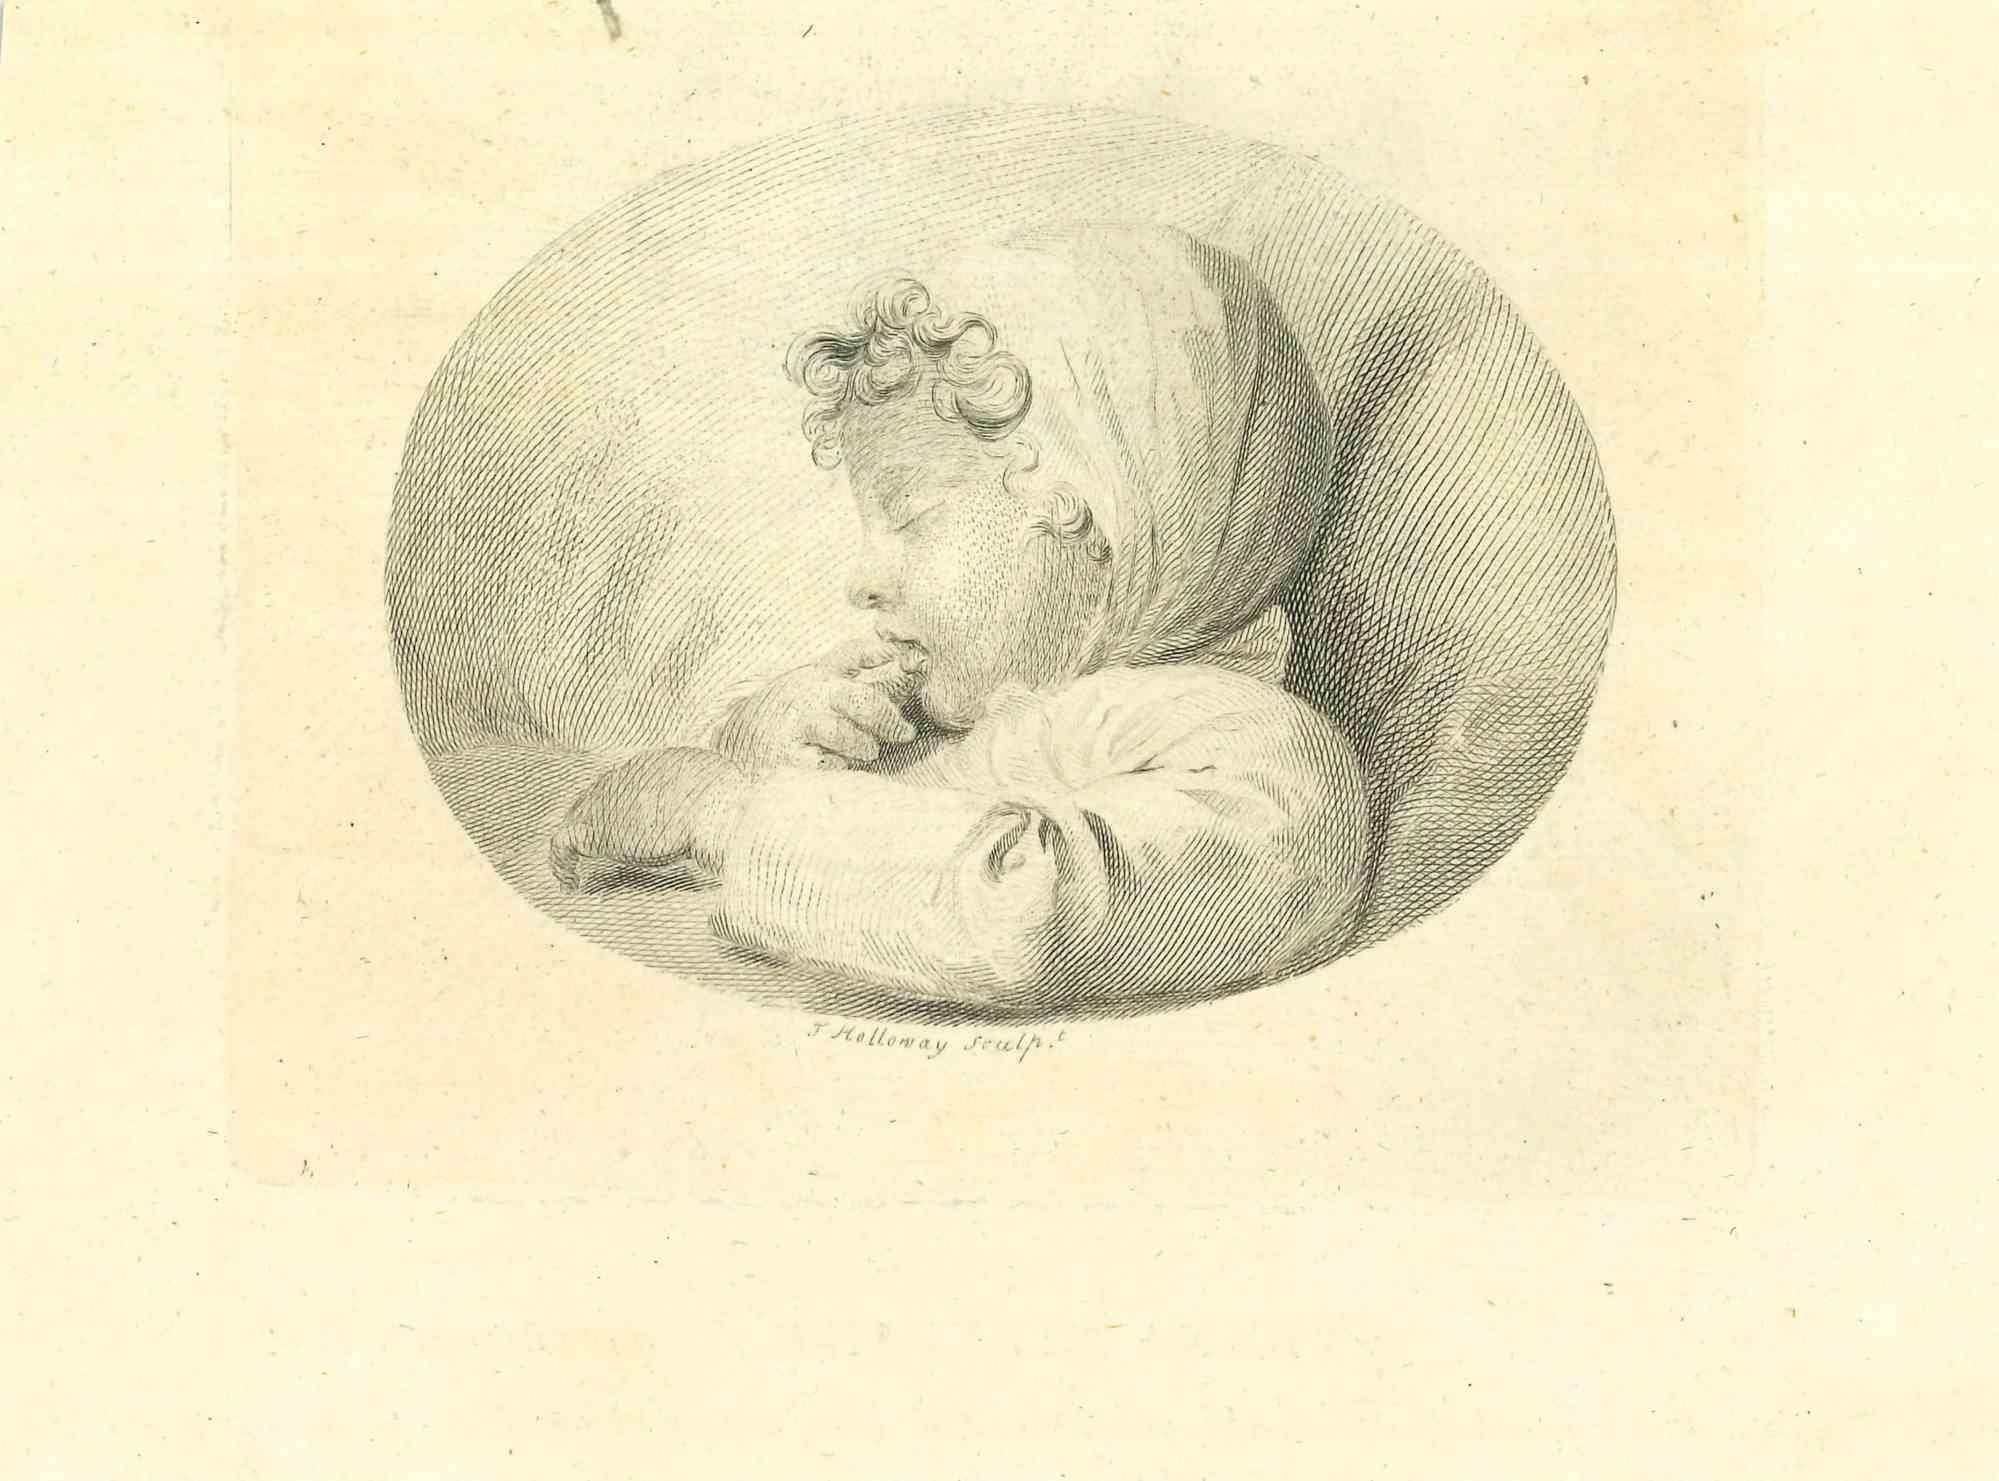 The Physiognomy - The profile of a baby is an original etching artwork realized by Thomas Holloway for Johann Caspar Lavater's "Essays on Physiognomy, Designed to Promote the Knowledge and the Love of Mankind", London, Bensley, 1810. 

With another